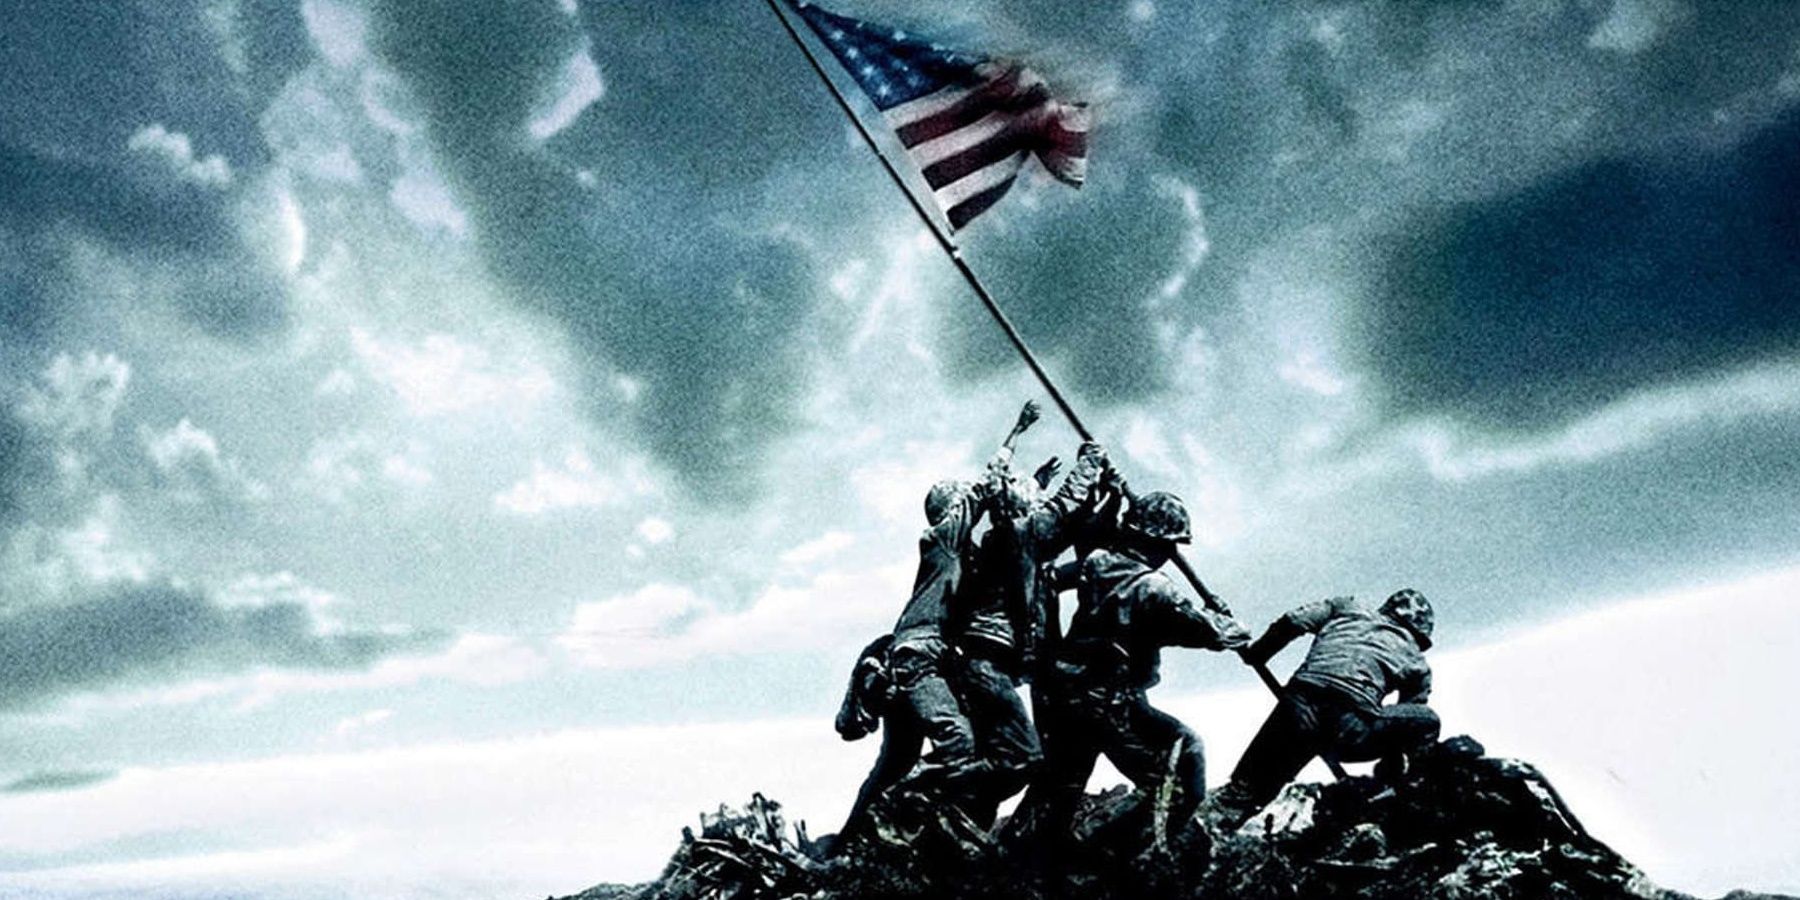 Soldiers hold up an American flag in the official poster for Flags Of Our Fathers